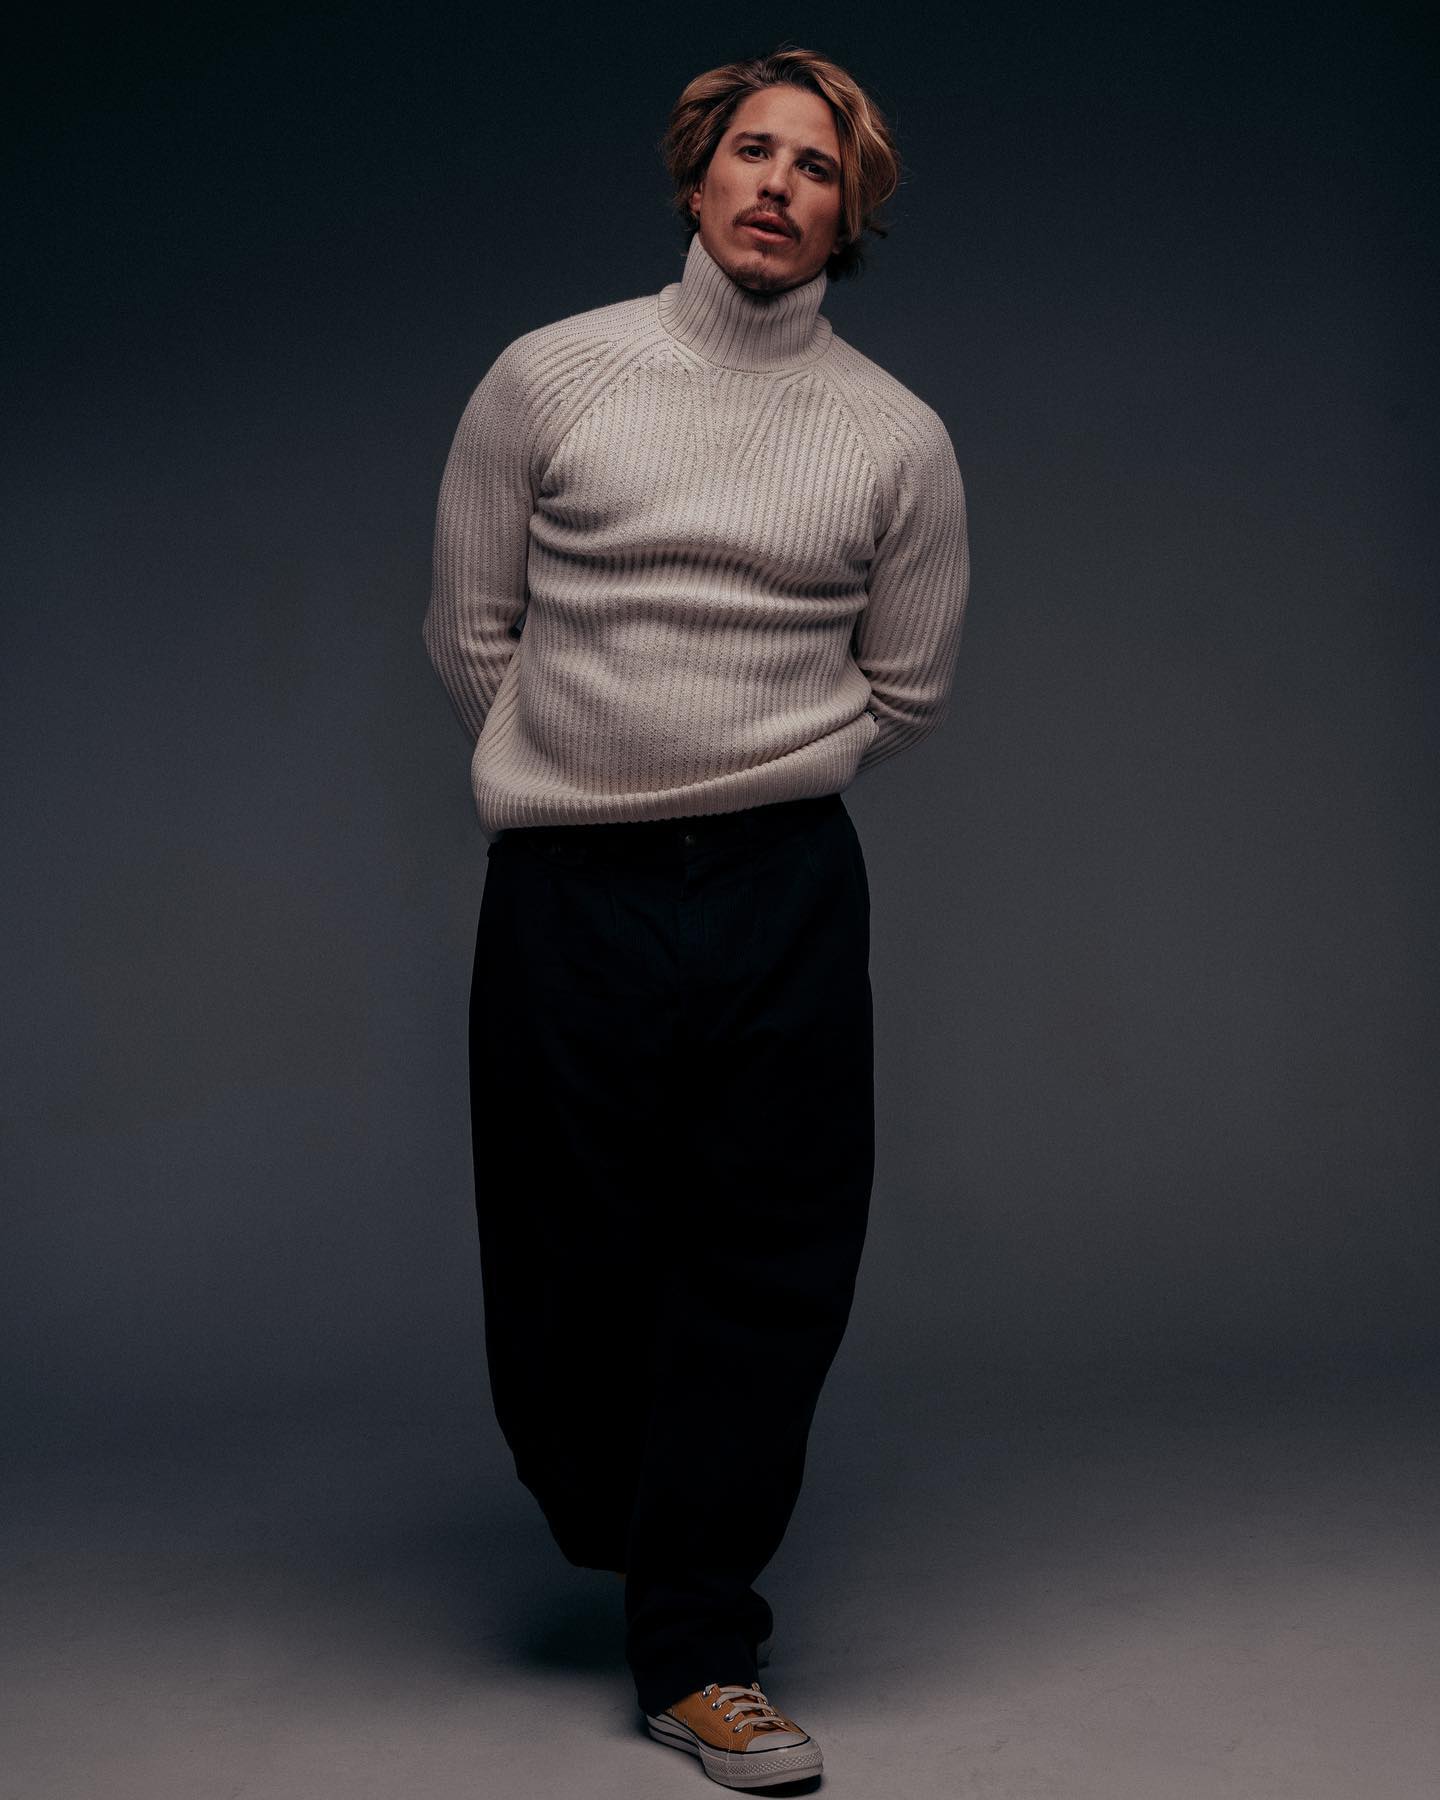 https://e.radikal.host/2023/04/20/Photo-by-ROMULO-ARANTES-NETO--Actor-on-April-15-2023.-May-be-an-image-of-1-person-sweater-knit-and-turtleneck.-1.jpg